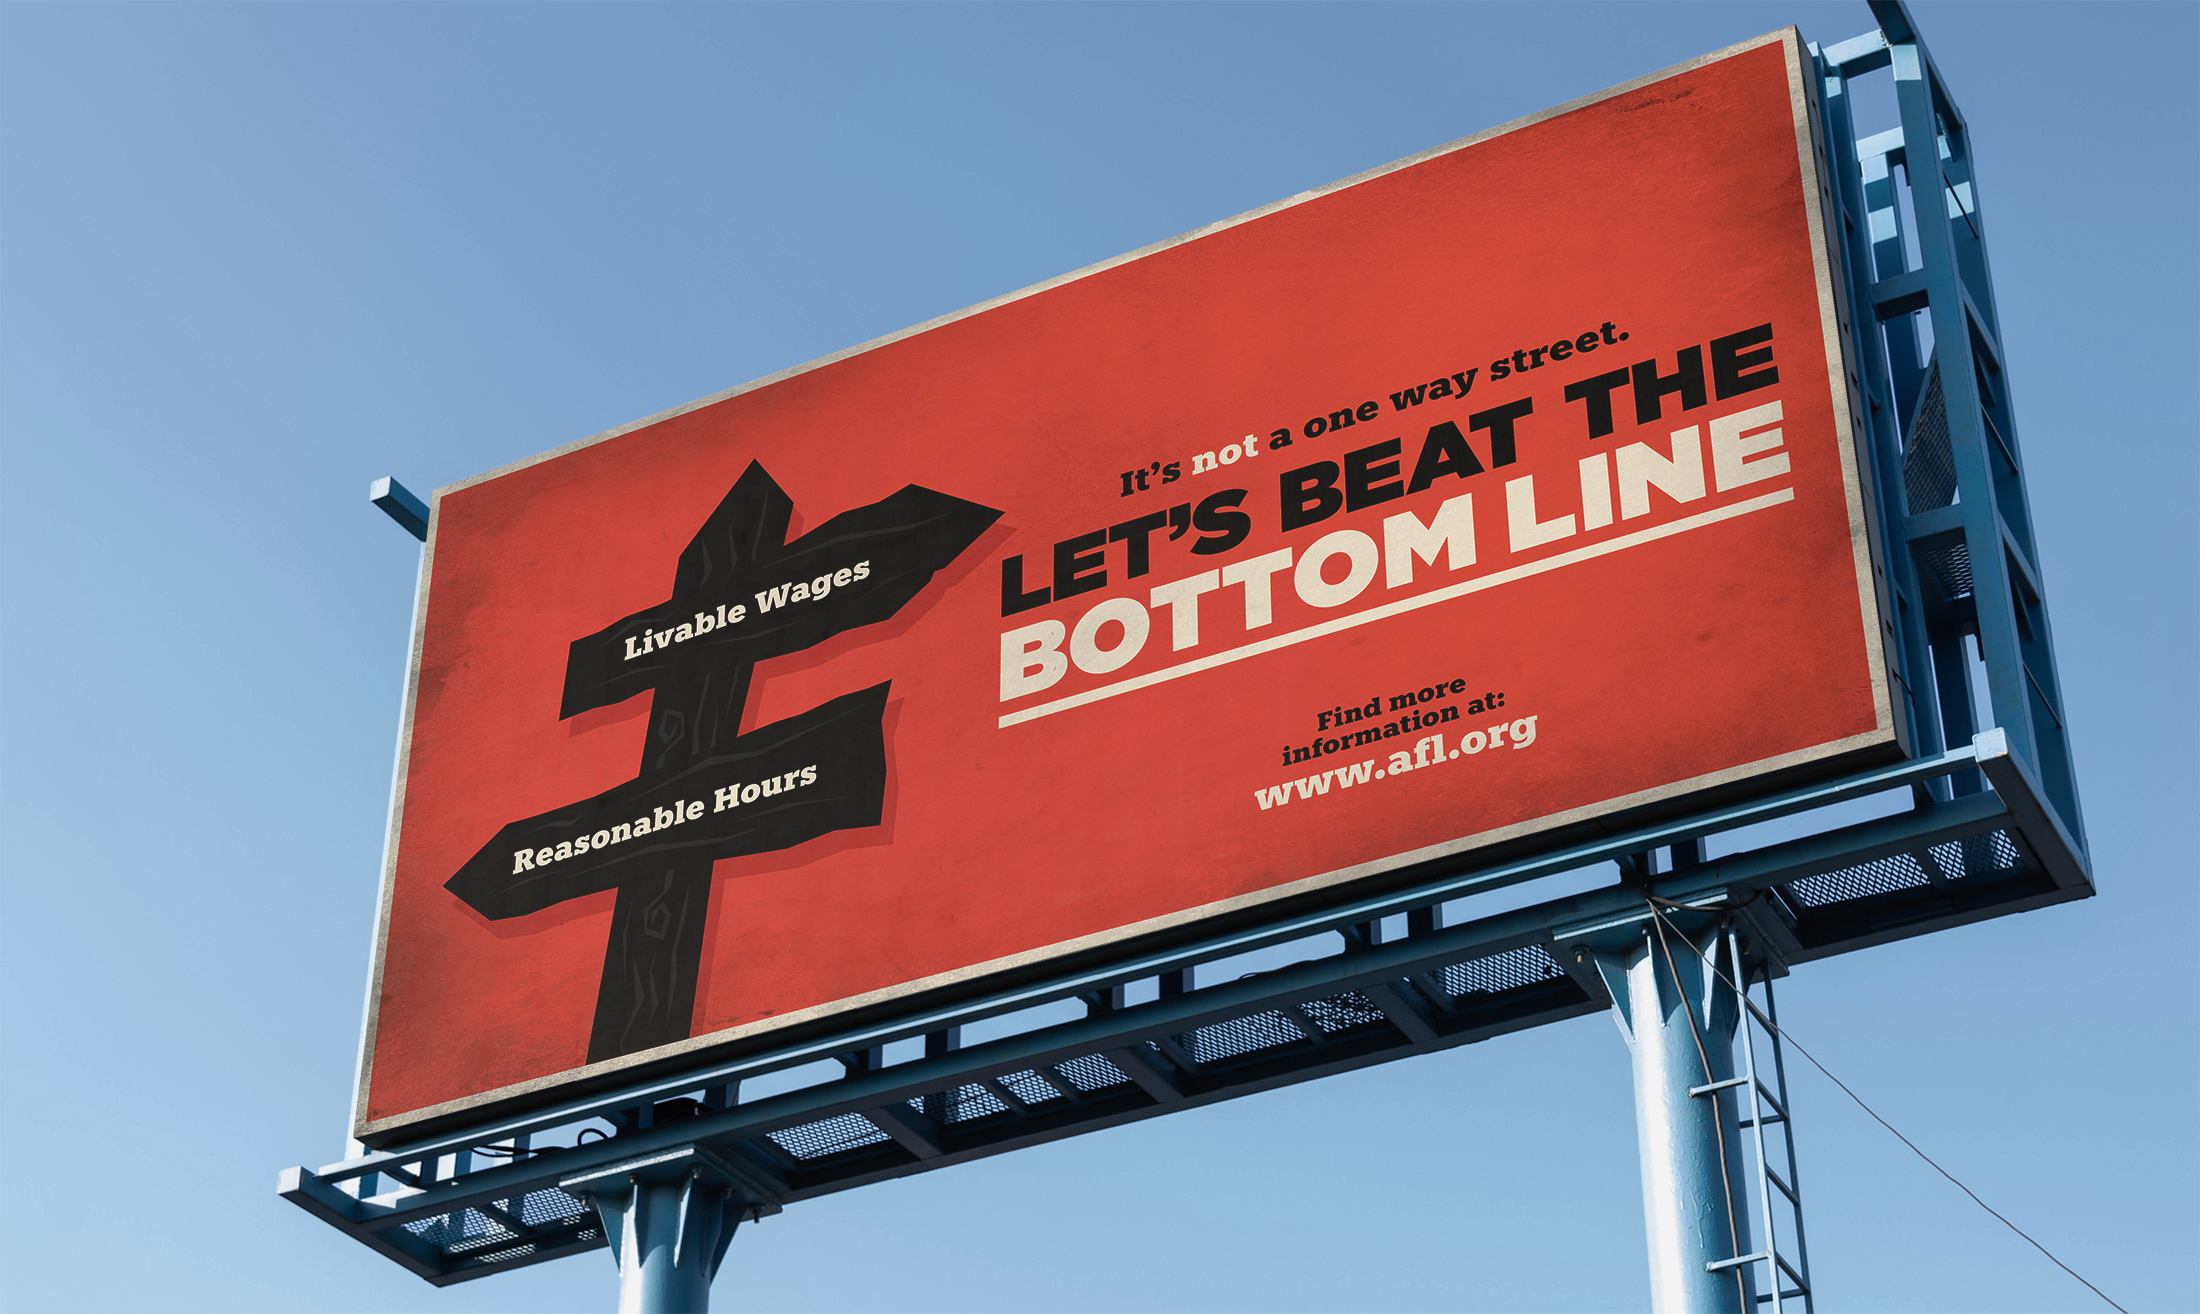 Beat the Bottom Line Campaign - Image 3